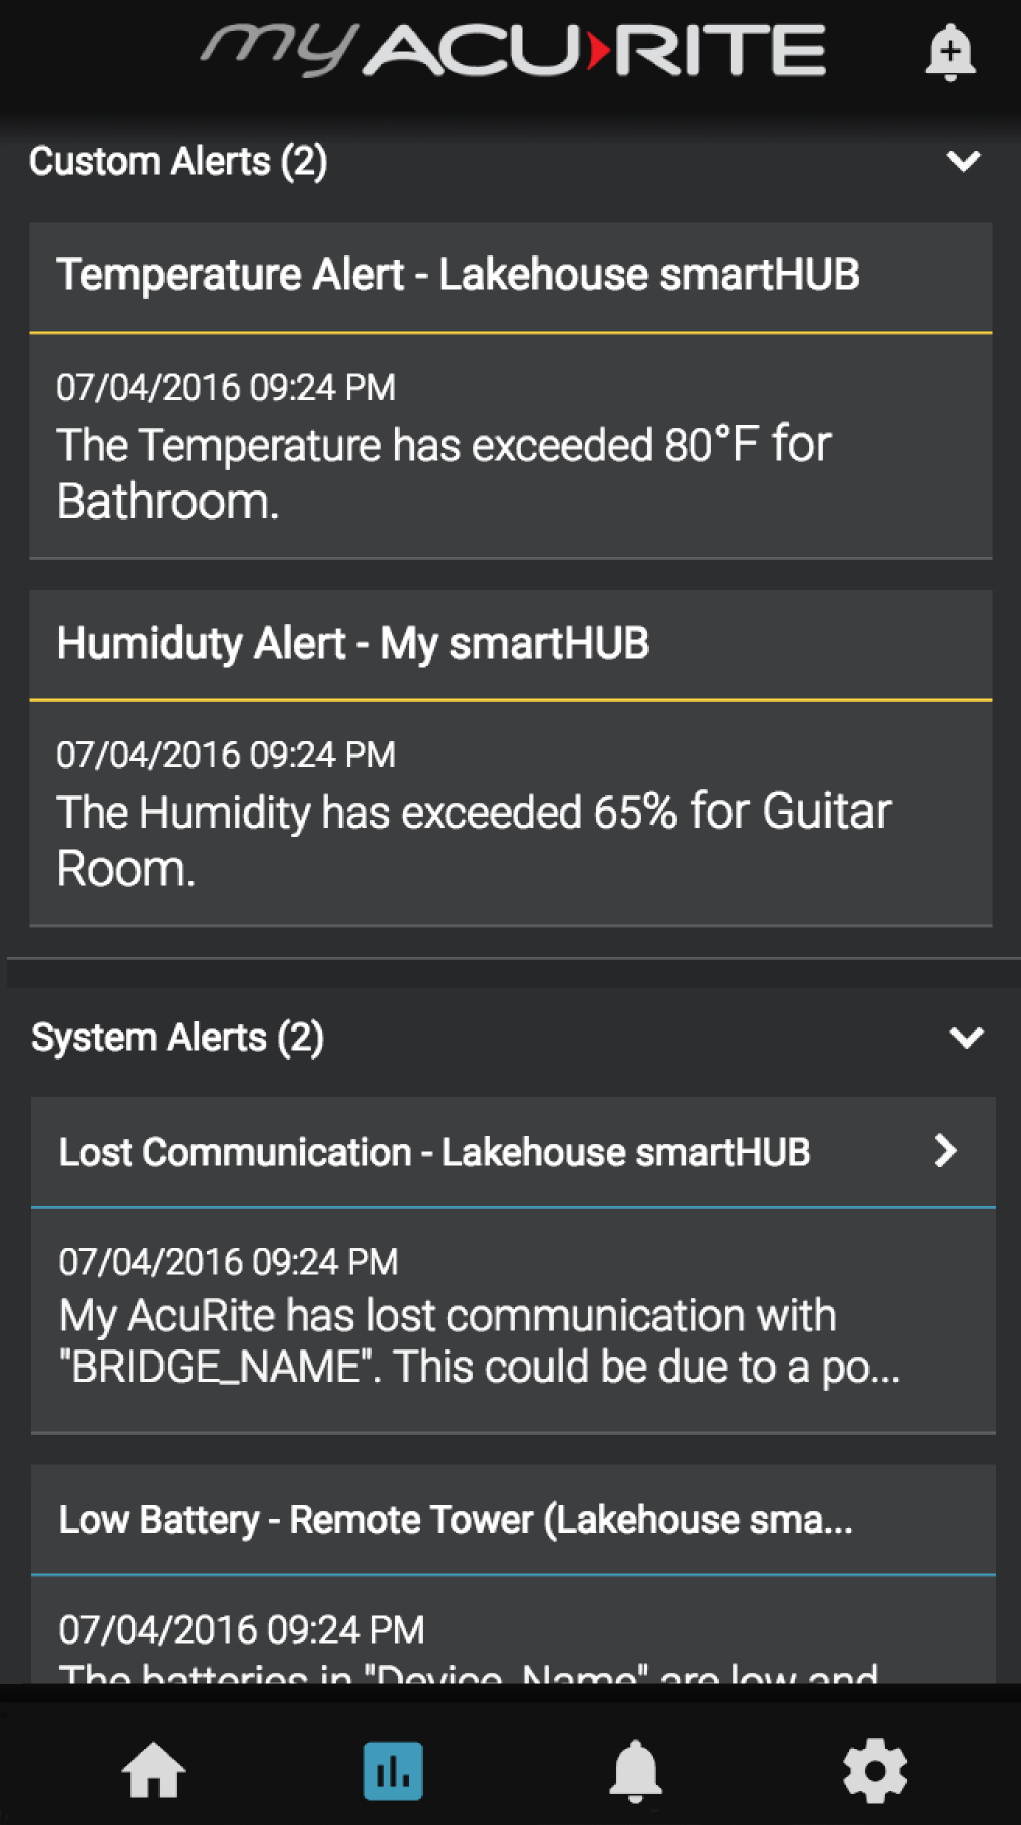 My AcuRite screenshot Backyard 5-in-1 overview with custom and system alerts